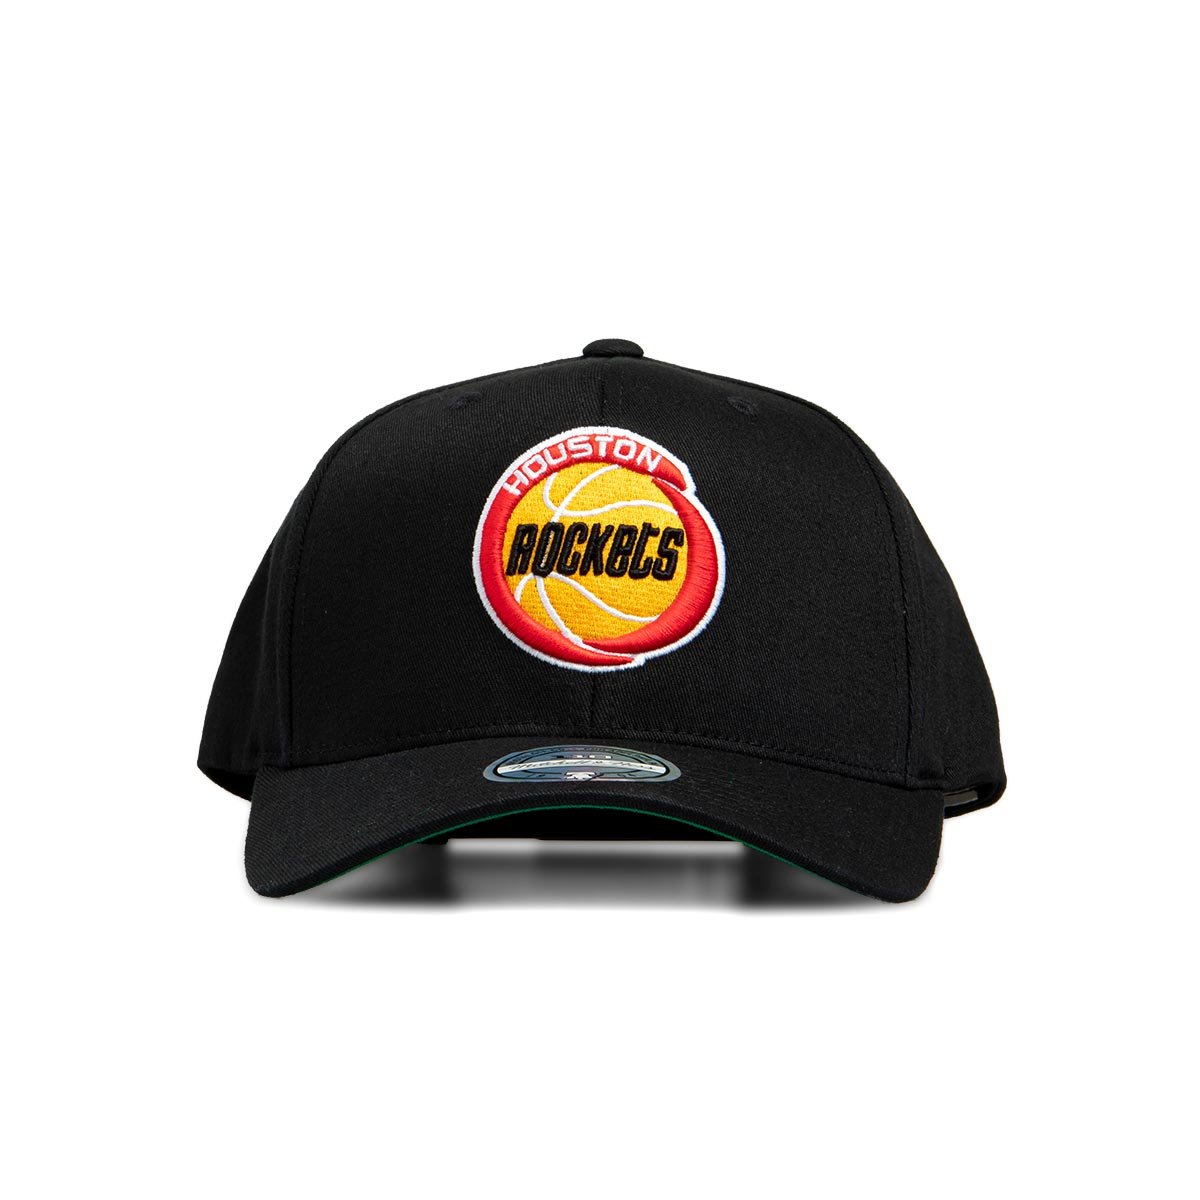 Mitchell & Ness 110 vintage logo snapback cap in off white